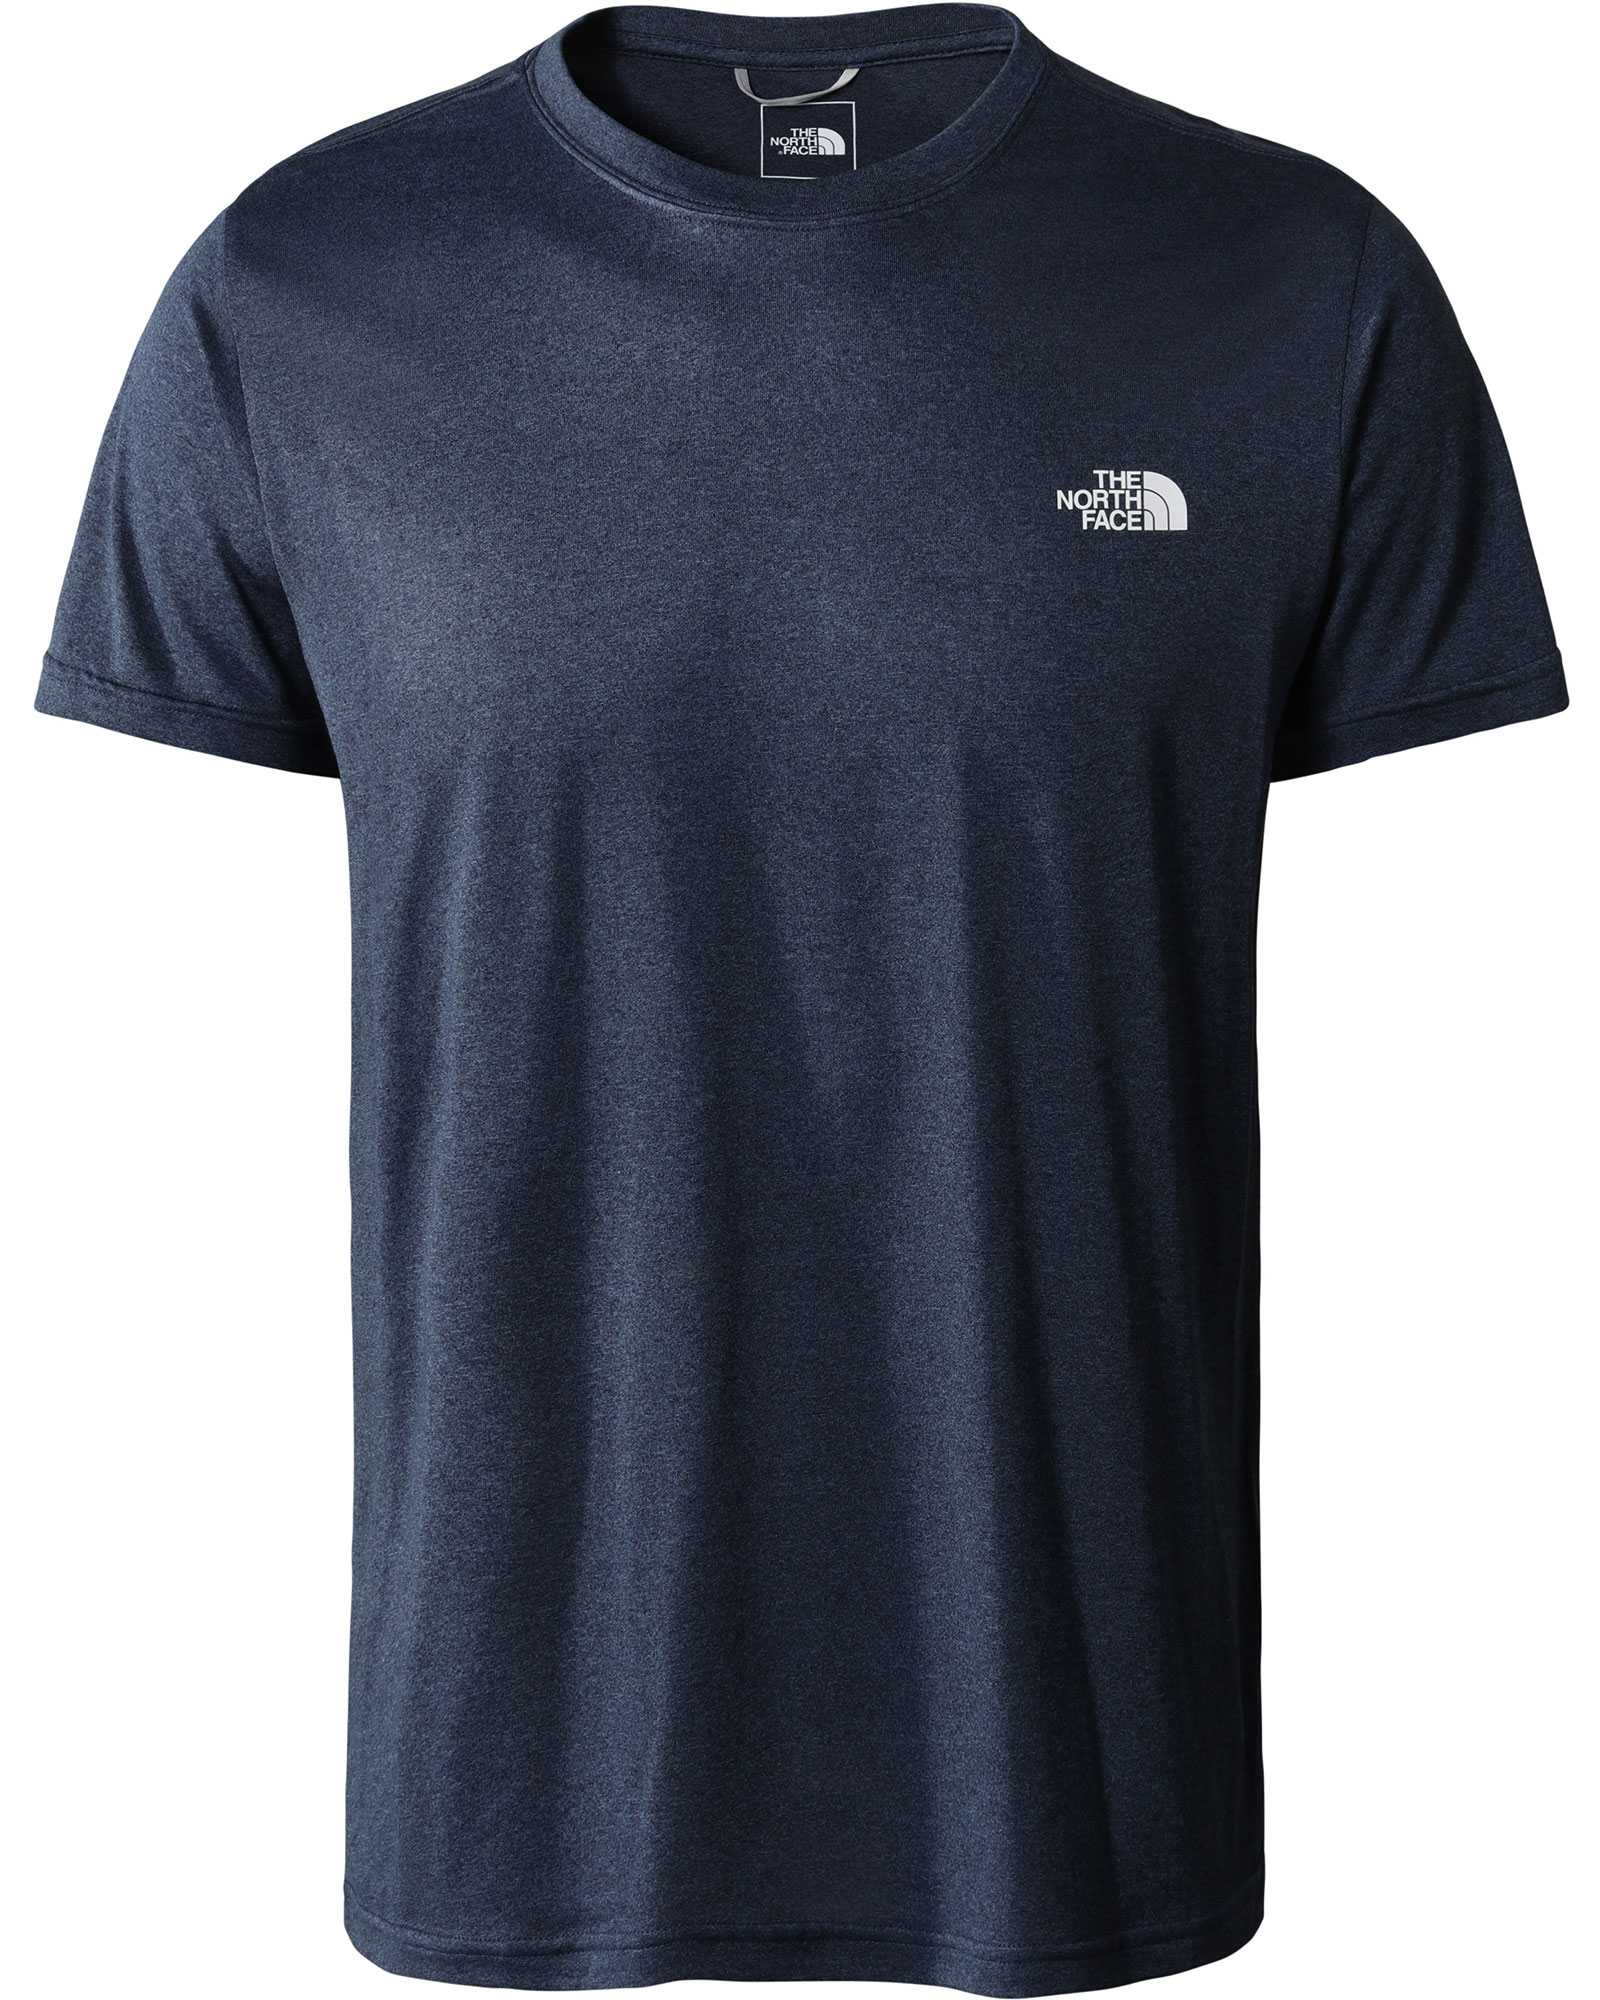 The North Face Reaxion Amp Men’s Crew T Shirt - Shady Blue Heather XS